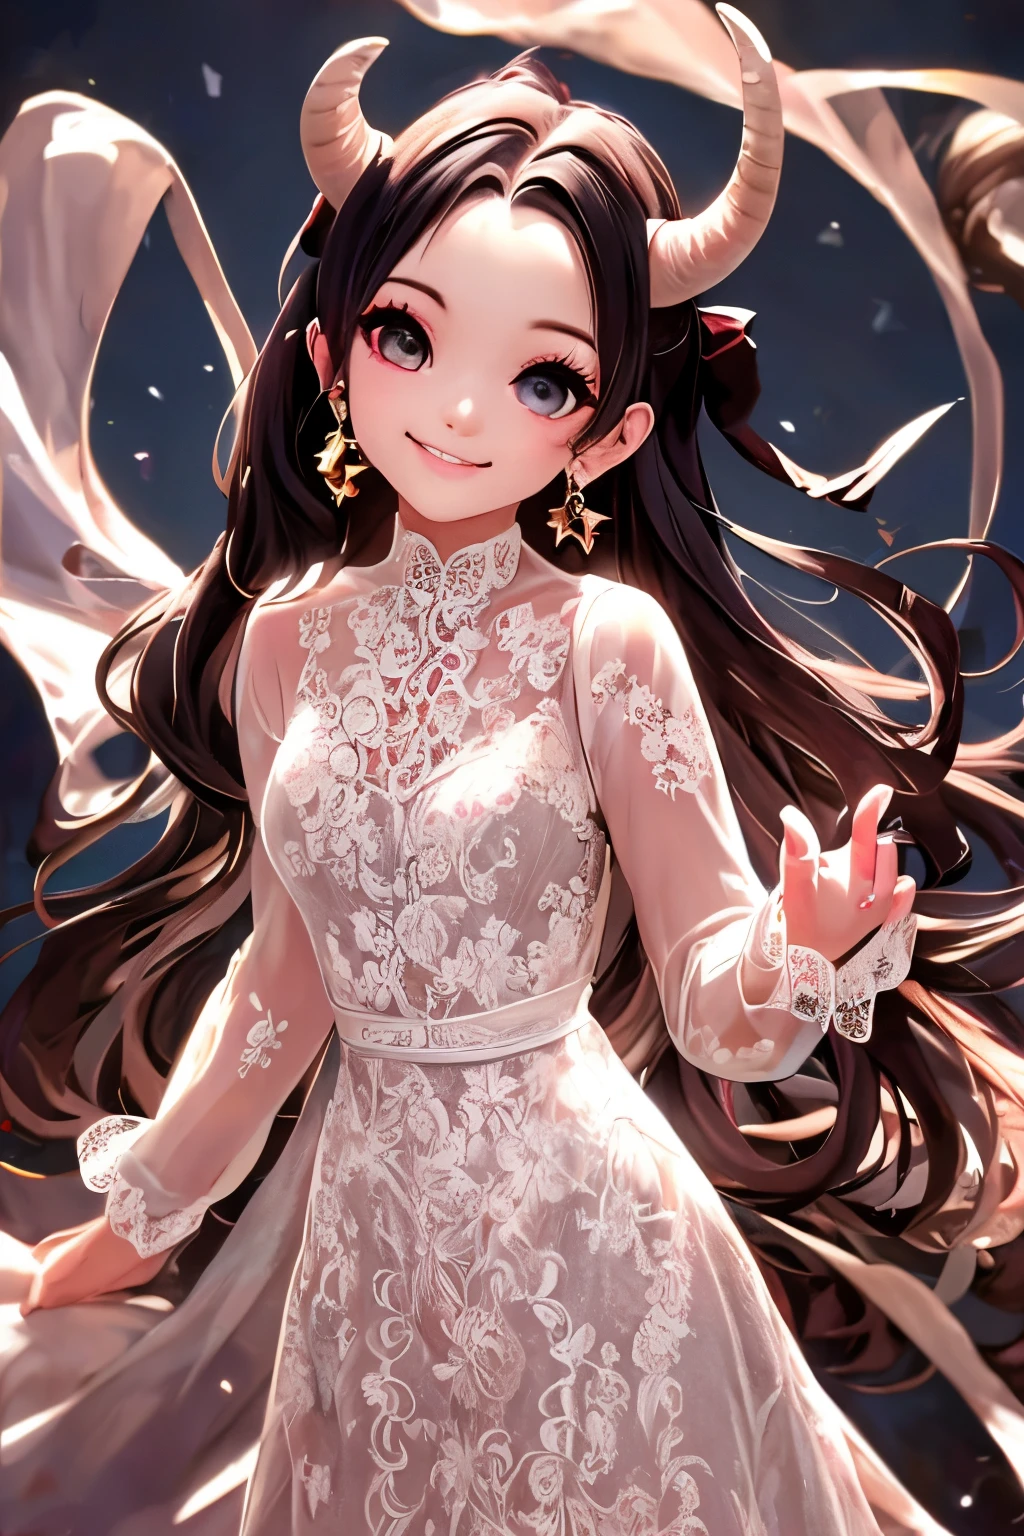 masterpiece, best quality, detailed face, a (horned demon girl) smiling, wearing a lace cloth dress, black hair, red smokey eyes makeup, (hair ribbon), choke, earrings, dramatic magic floating pose, (full body).